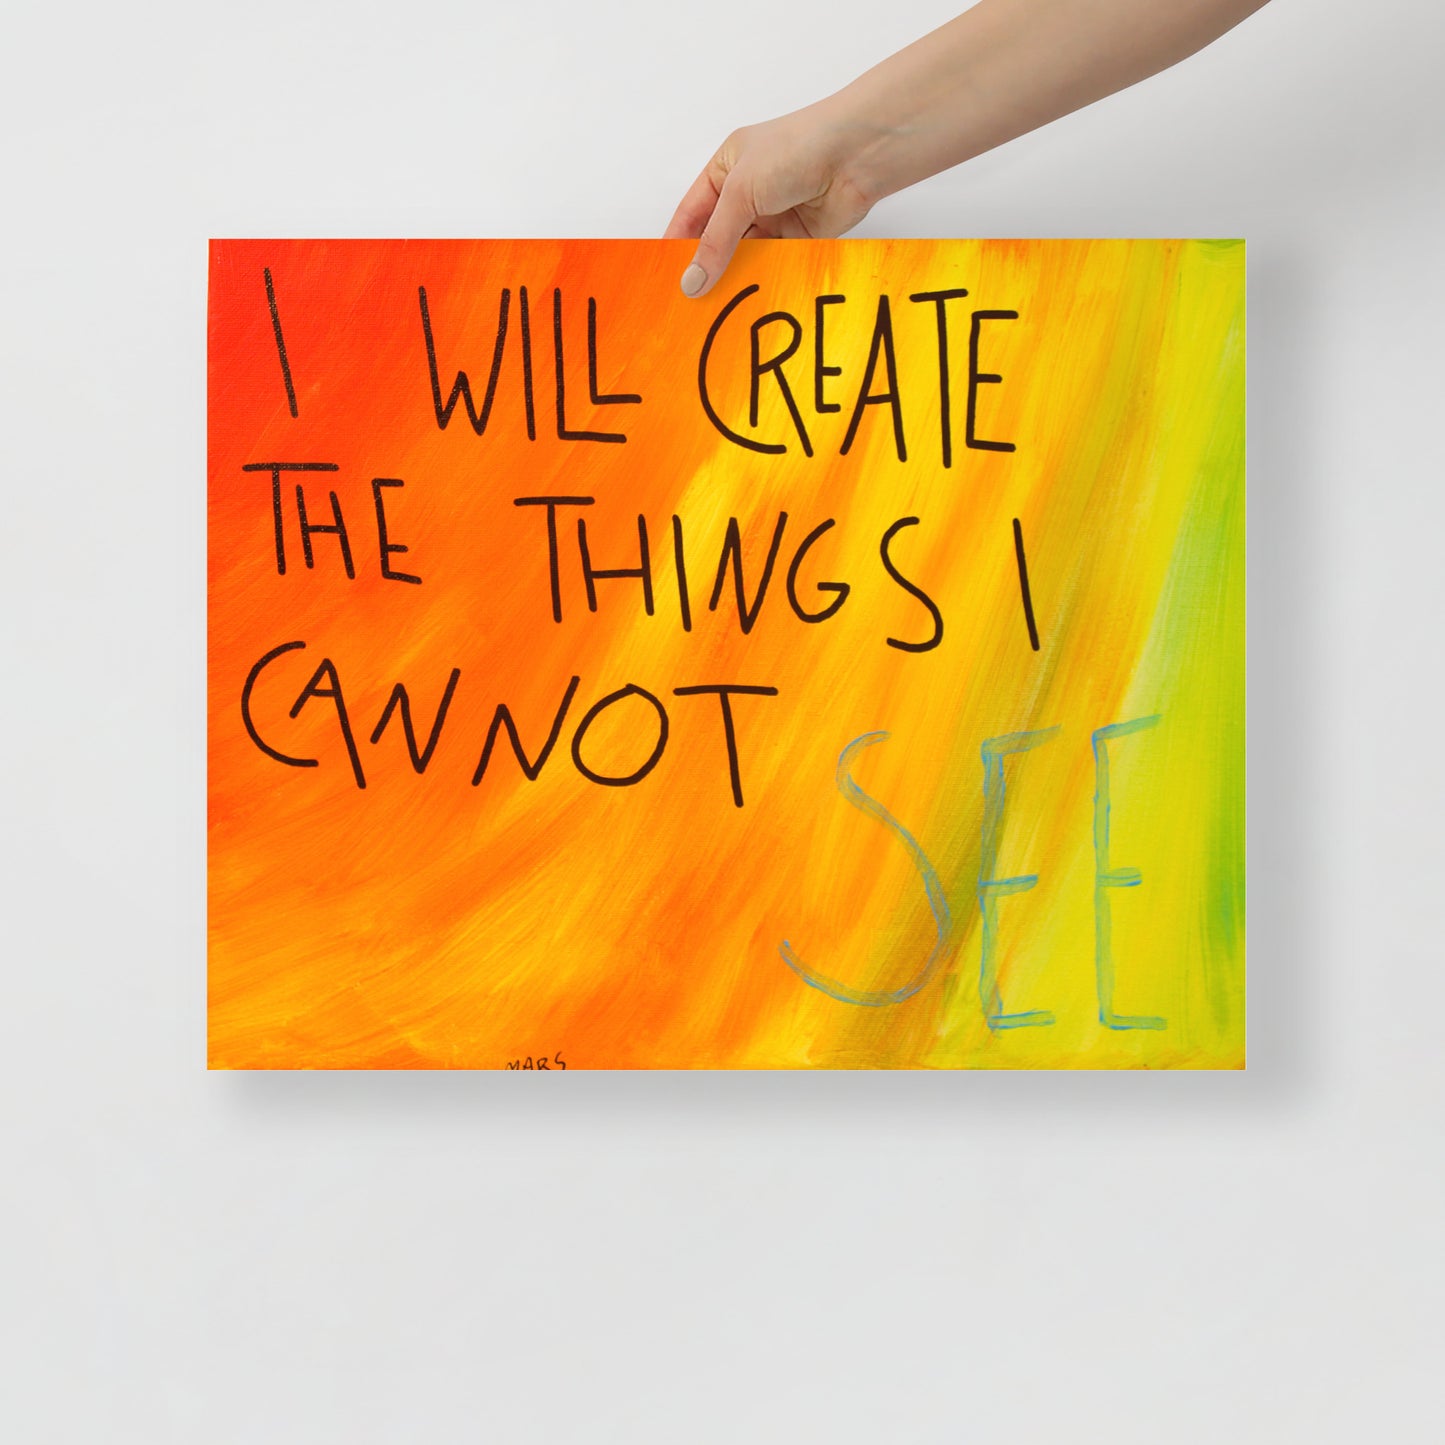 I will create the things I cannot see print